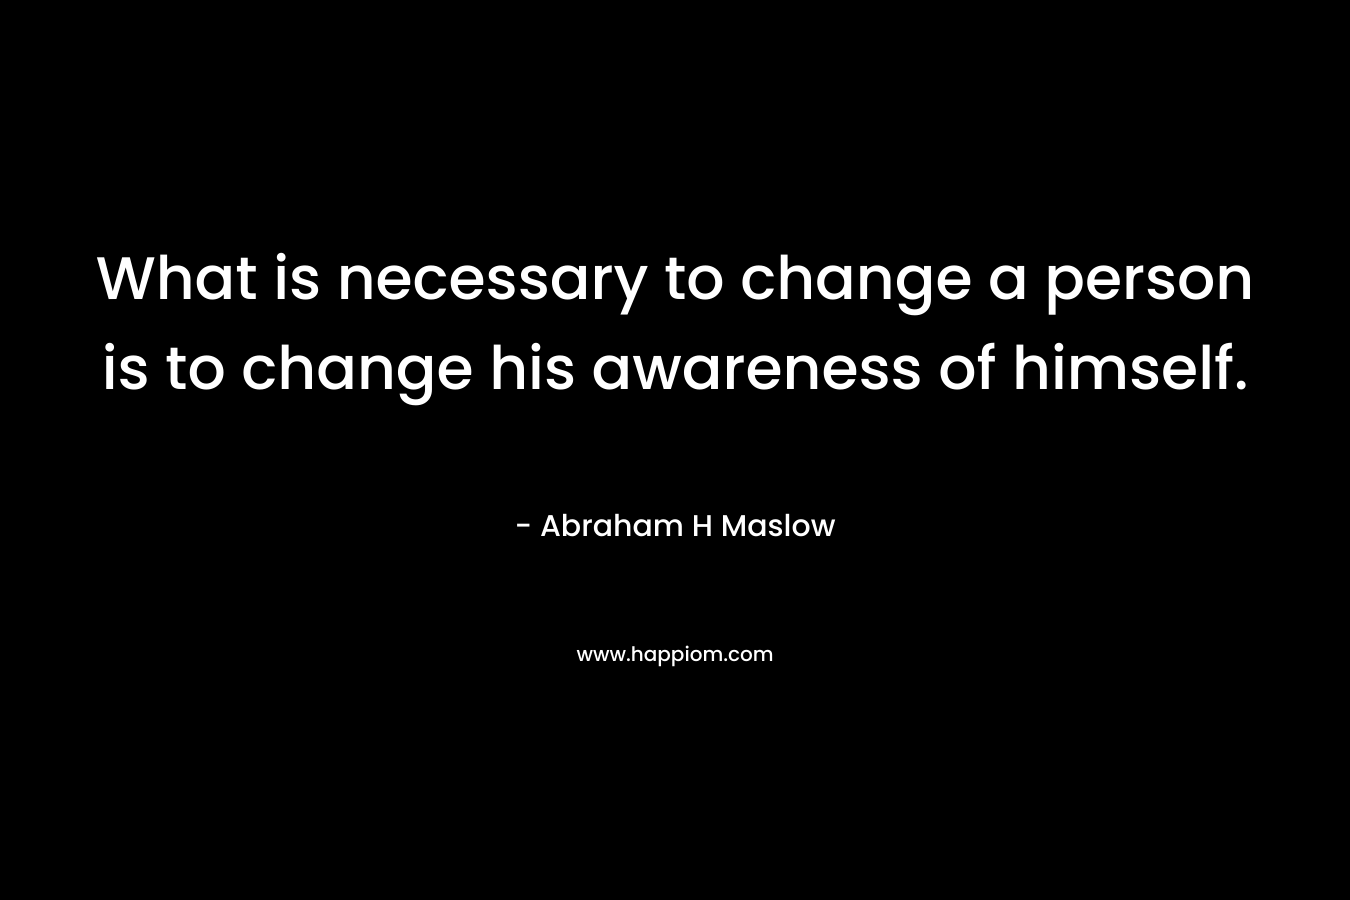 What is necessary to change a person is to change his awareness of himself. – Abraham H Maslow